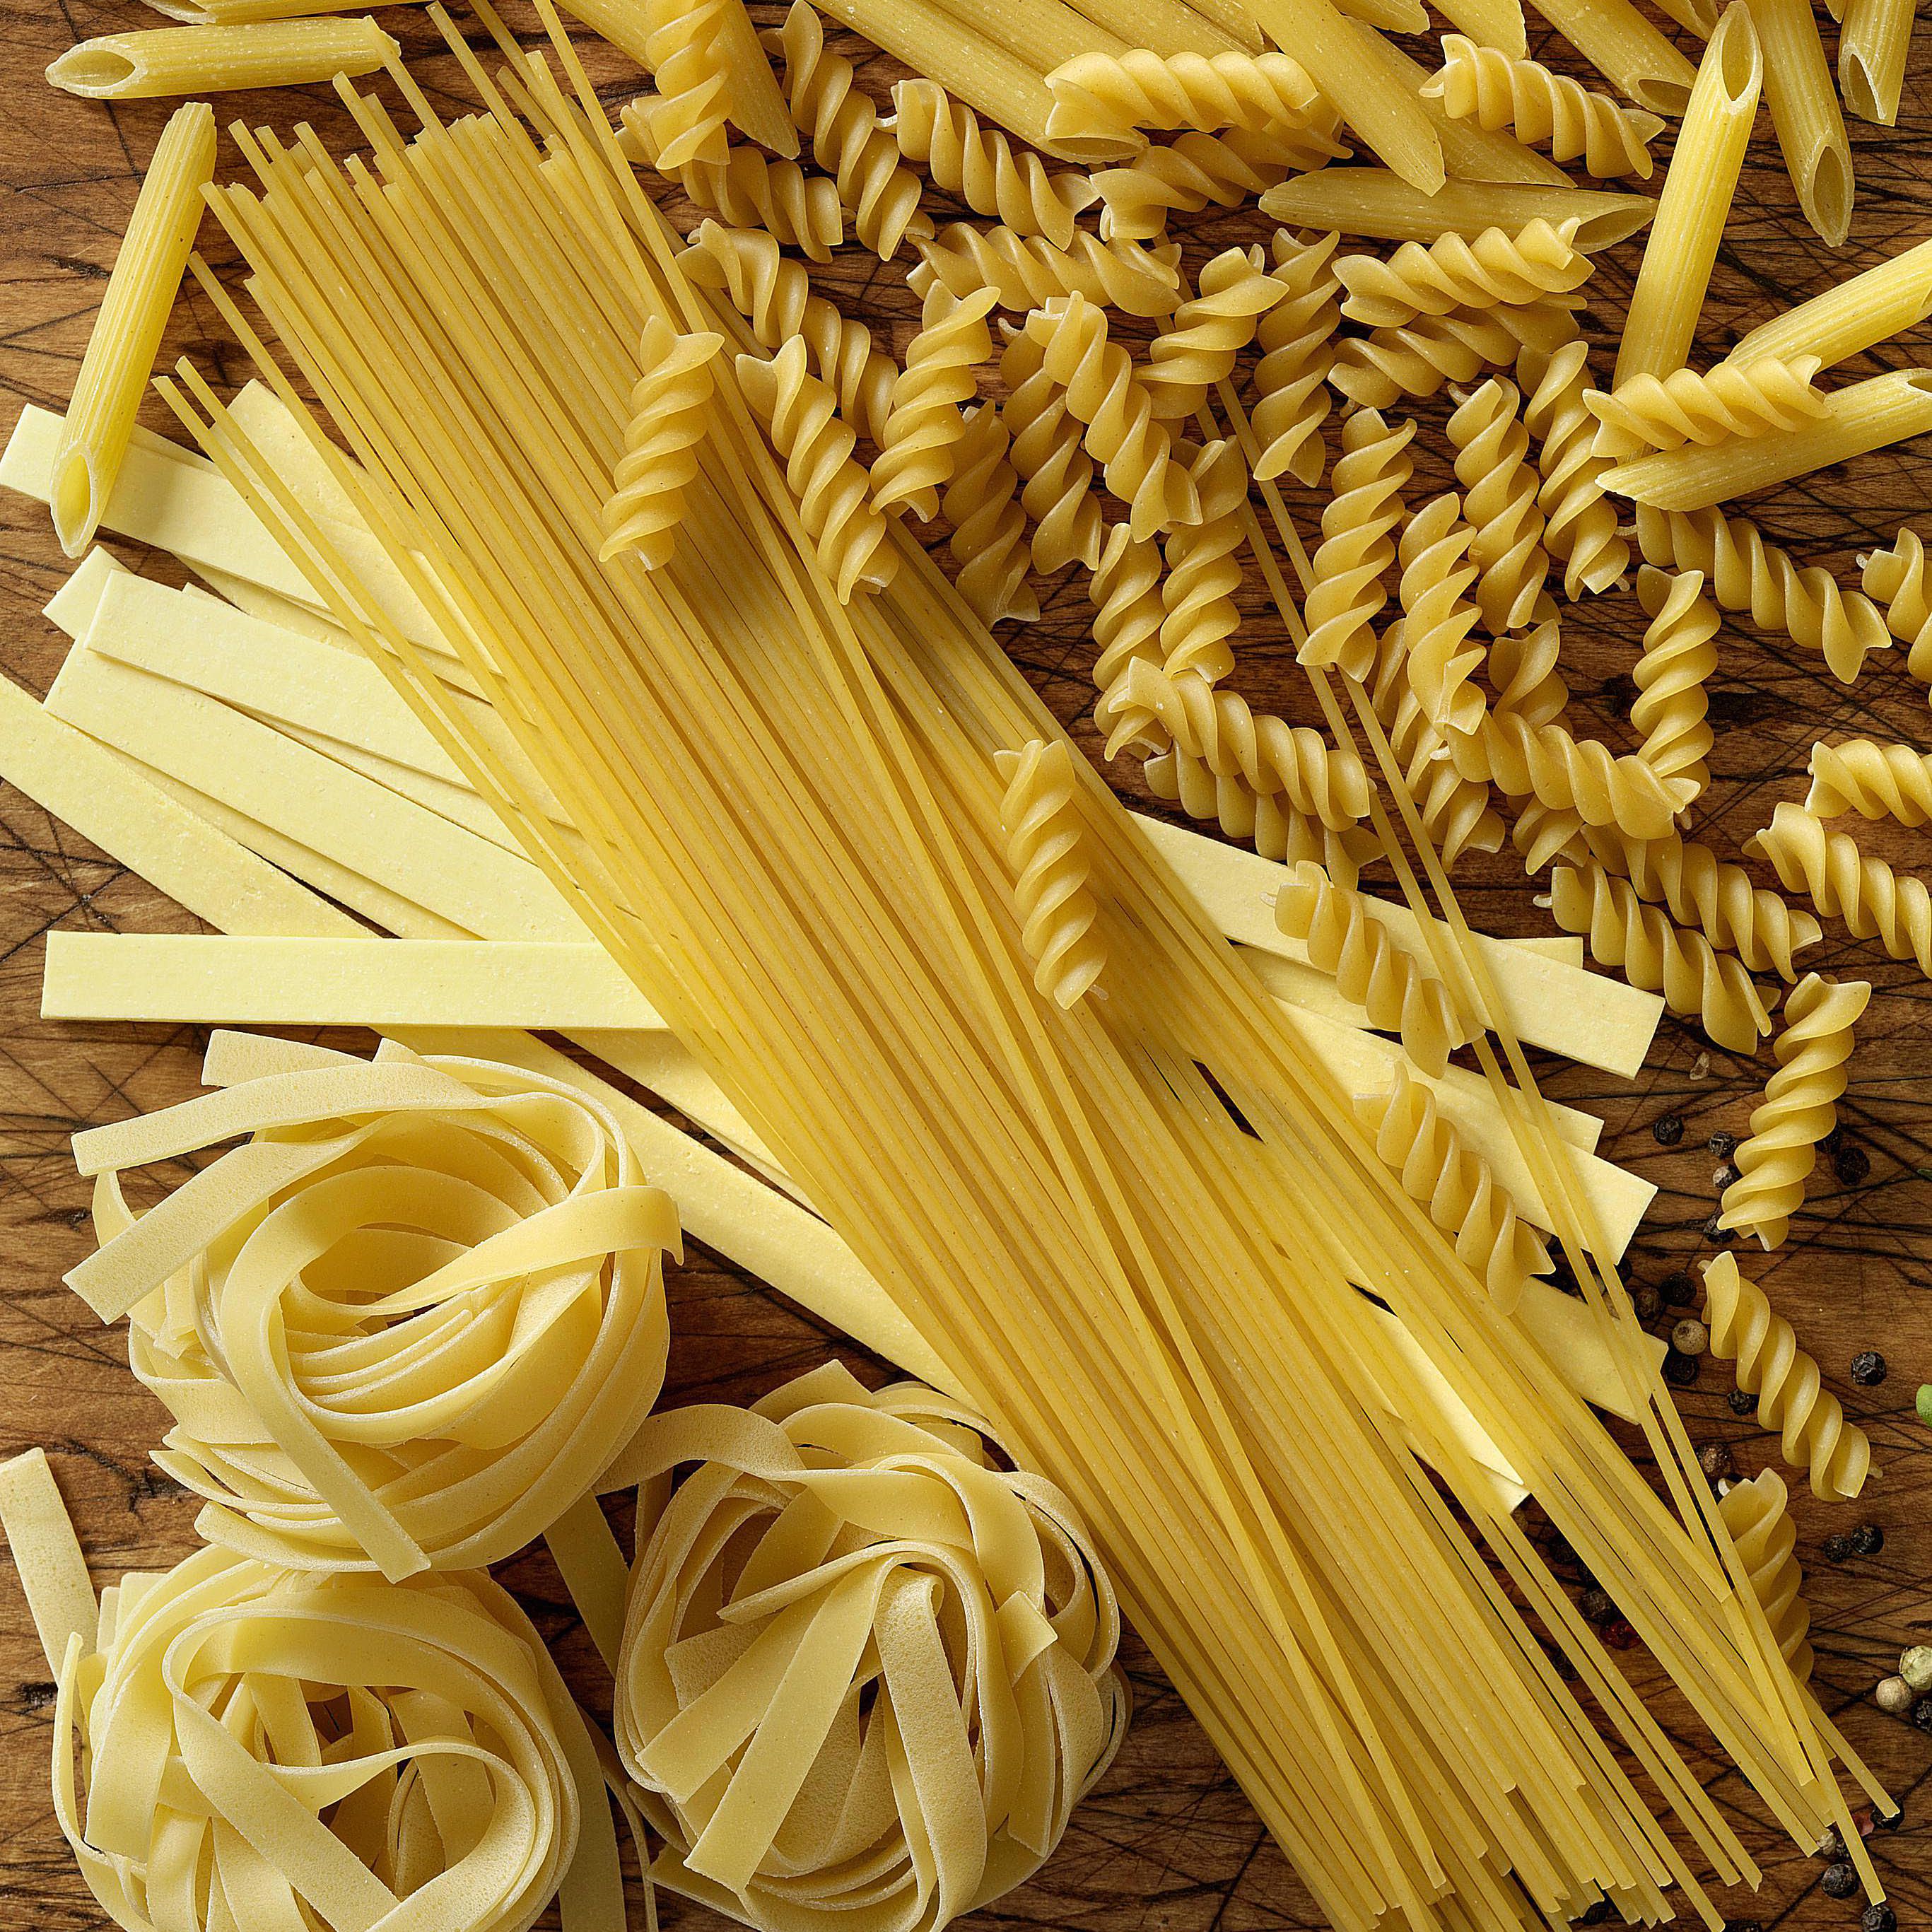 A wide assortment of different pastas